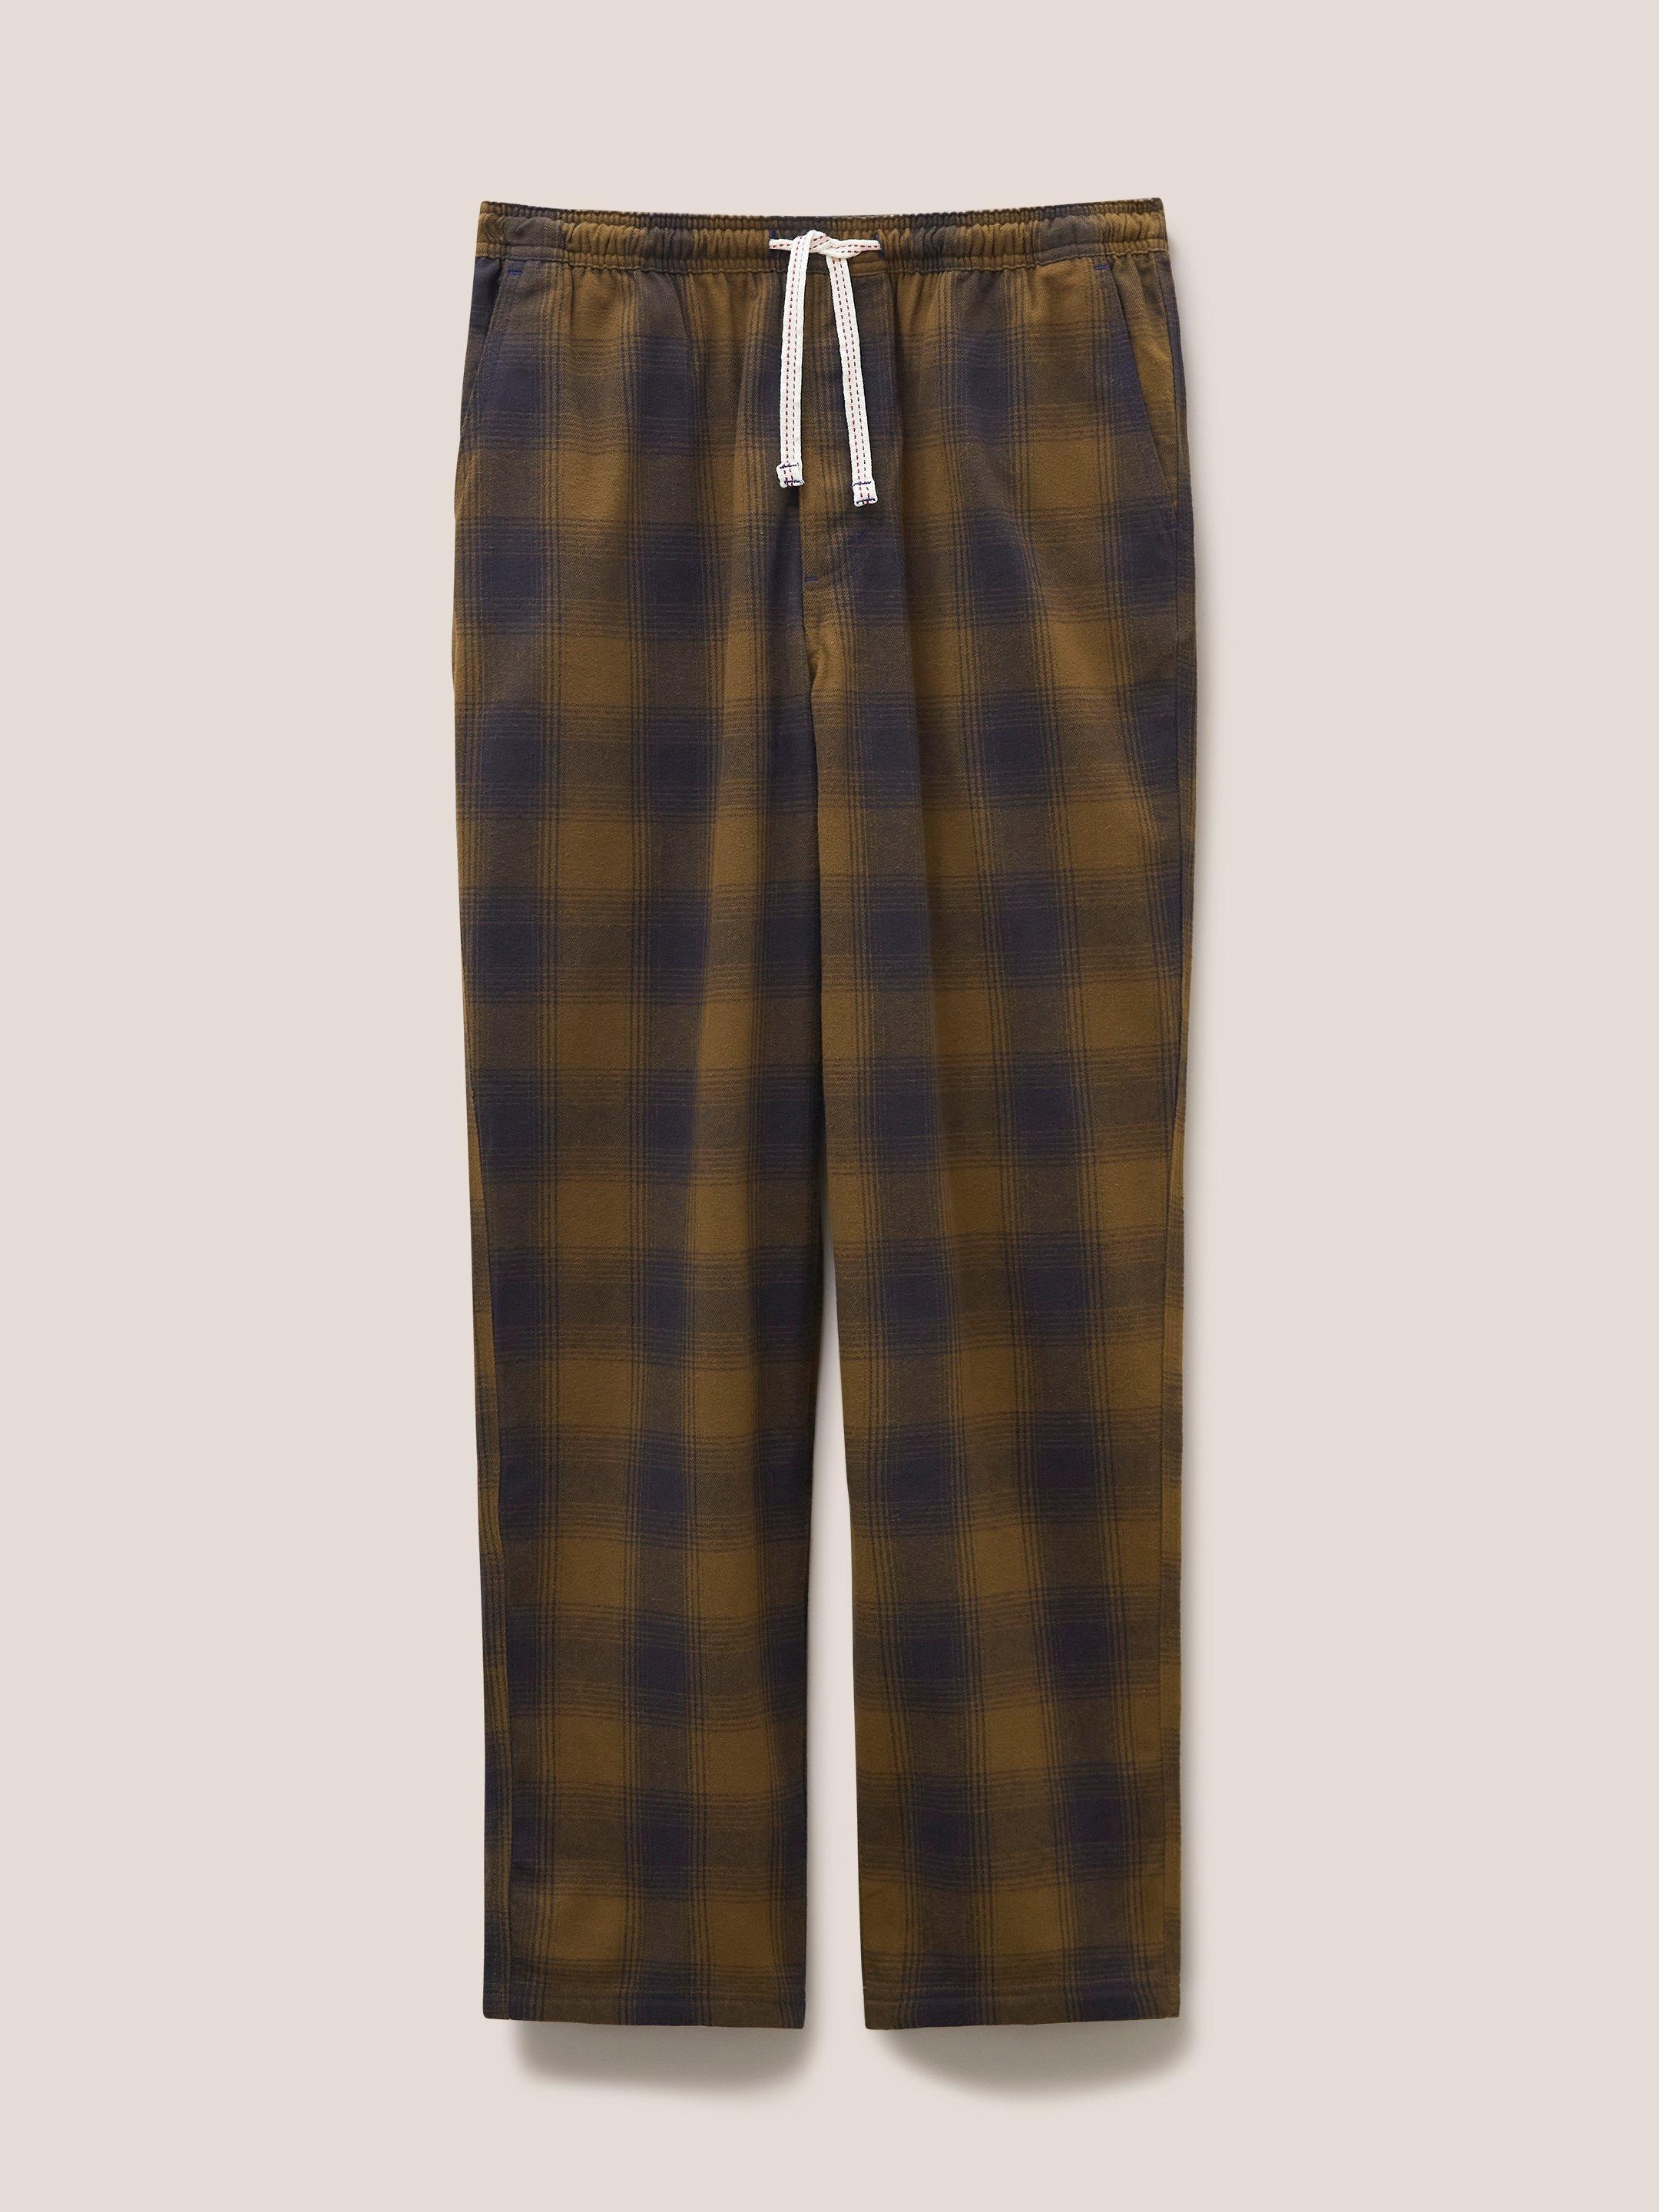 Leyland PJ Trouser in MID GREEN - FLAT FRONT